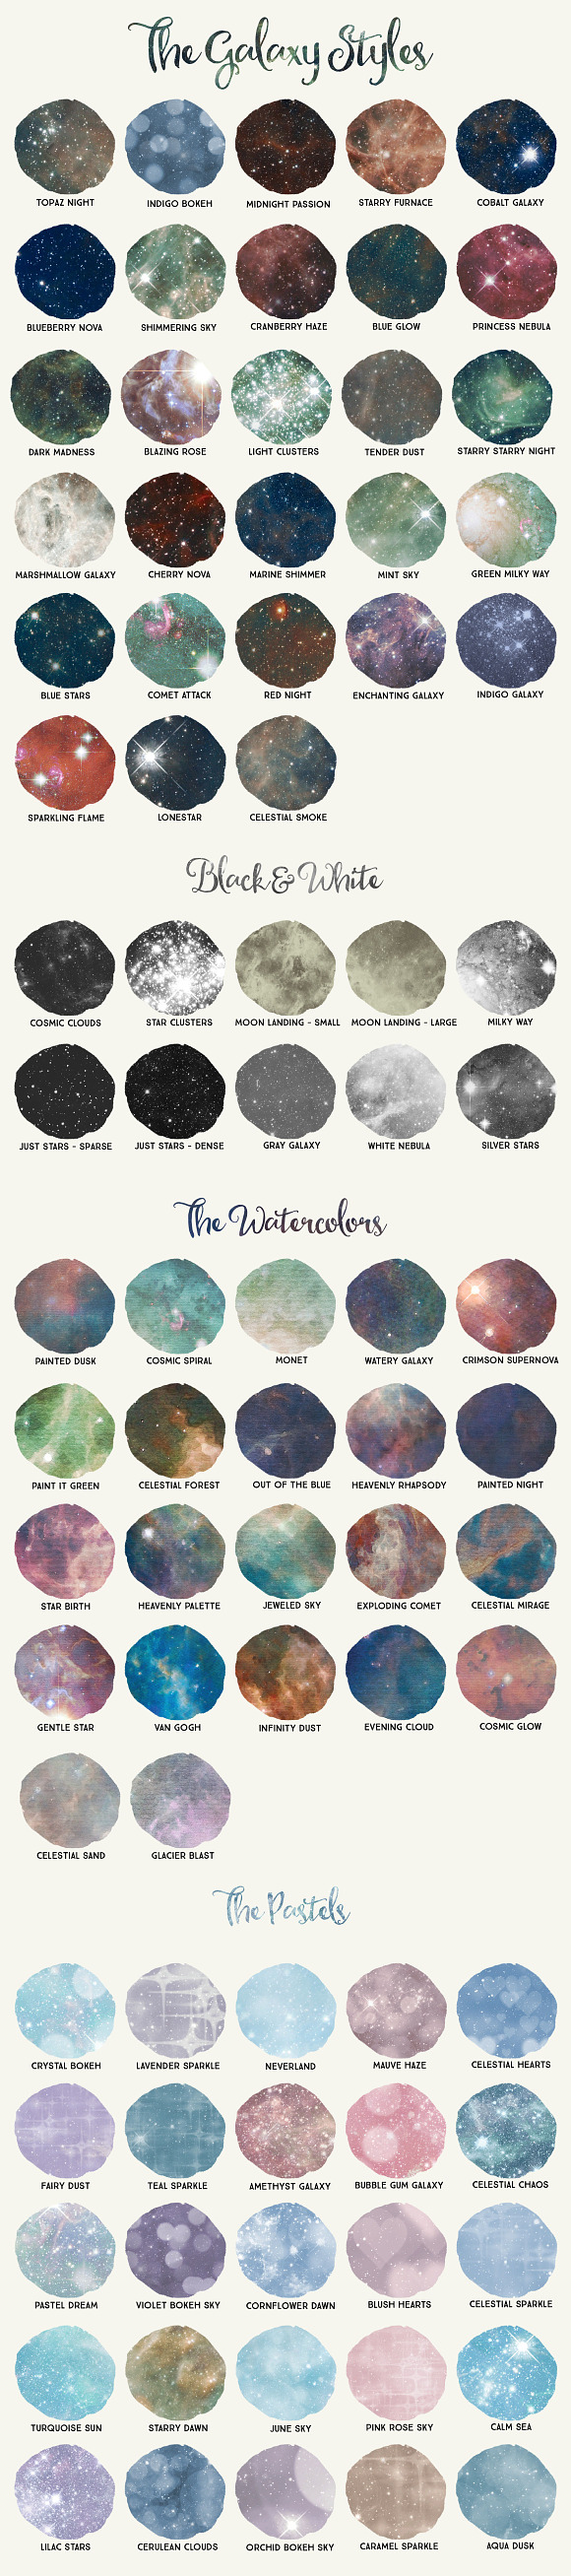 Galaxy Design Kit for Illustrator in Photoshop Color Palettes - product preview 2